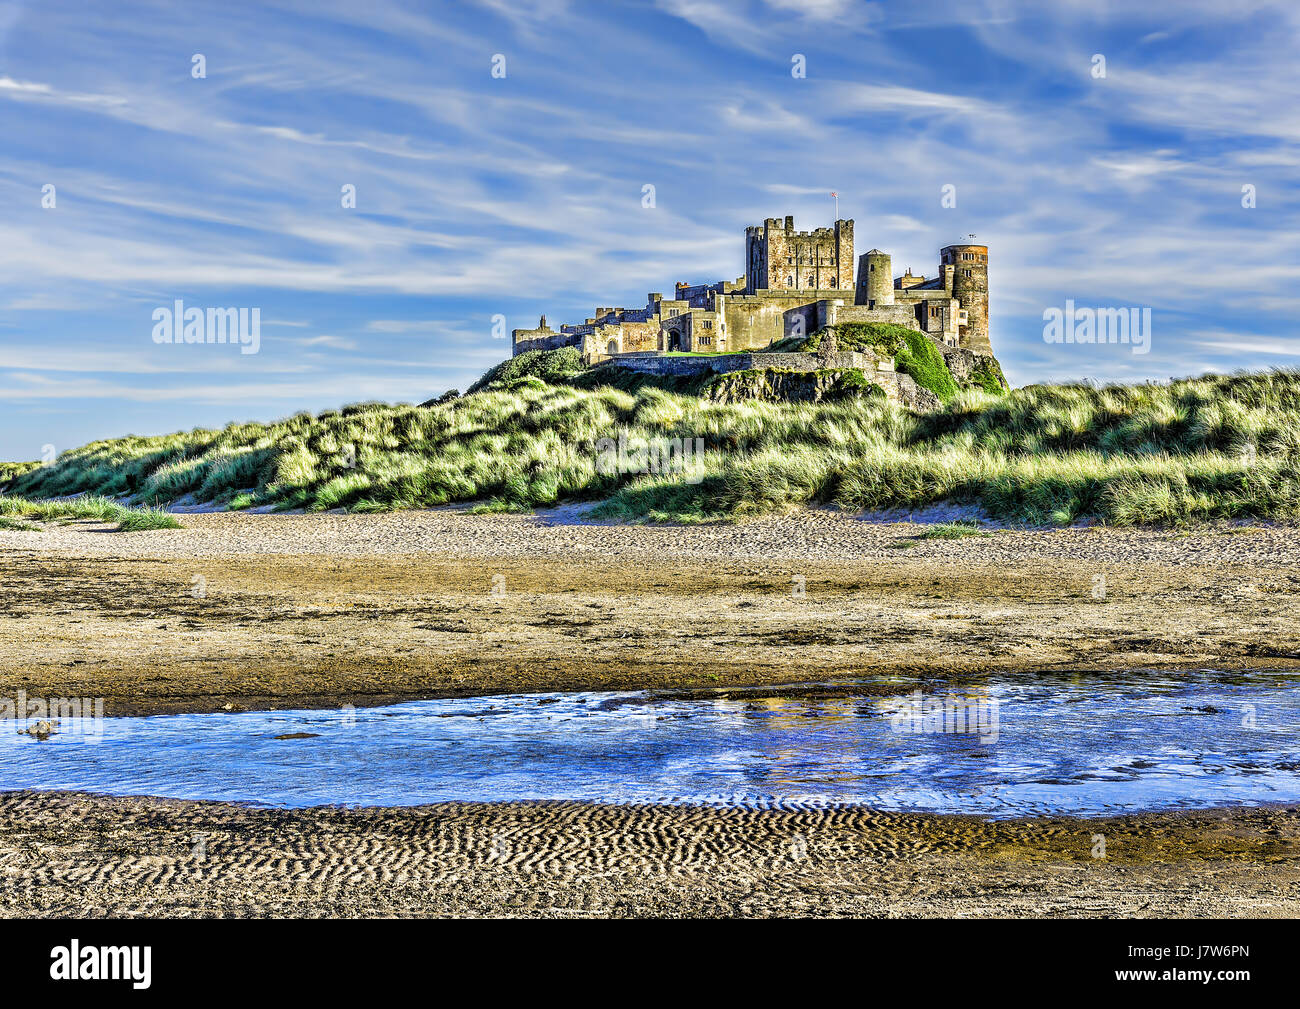 Pictorial Art-Image, Northumberland, North East England Stock Photo